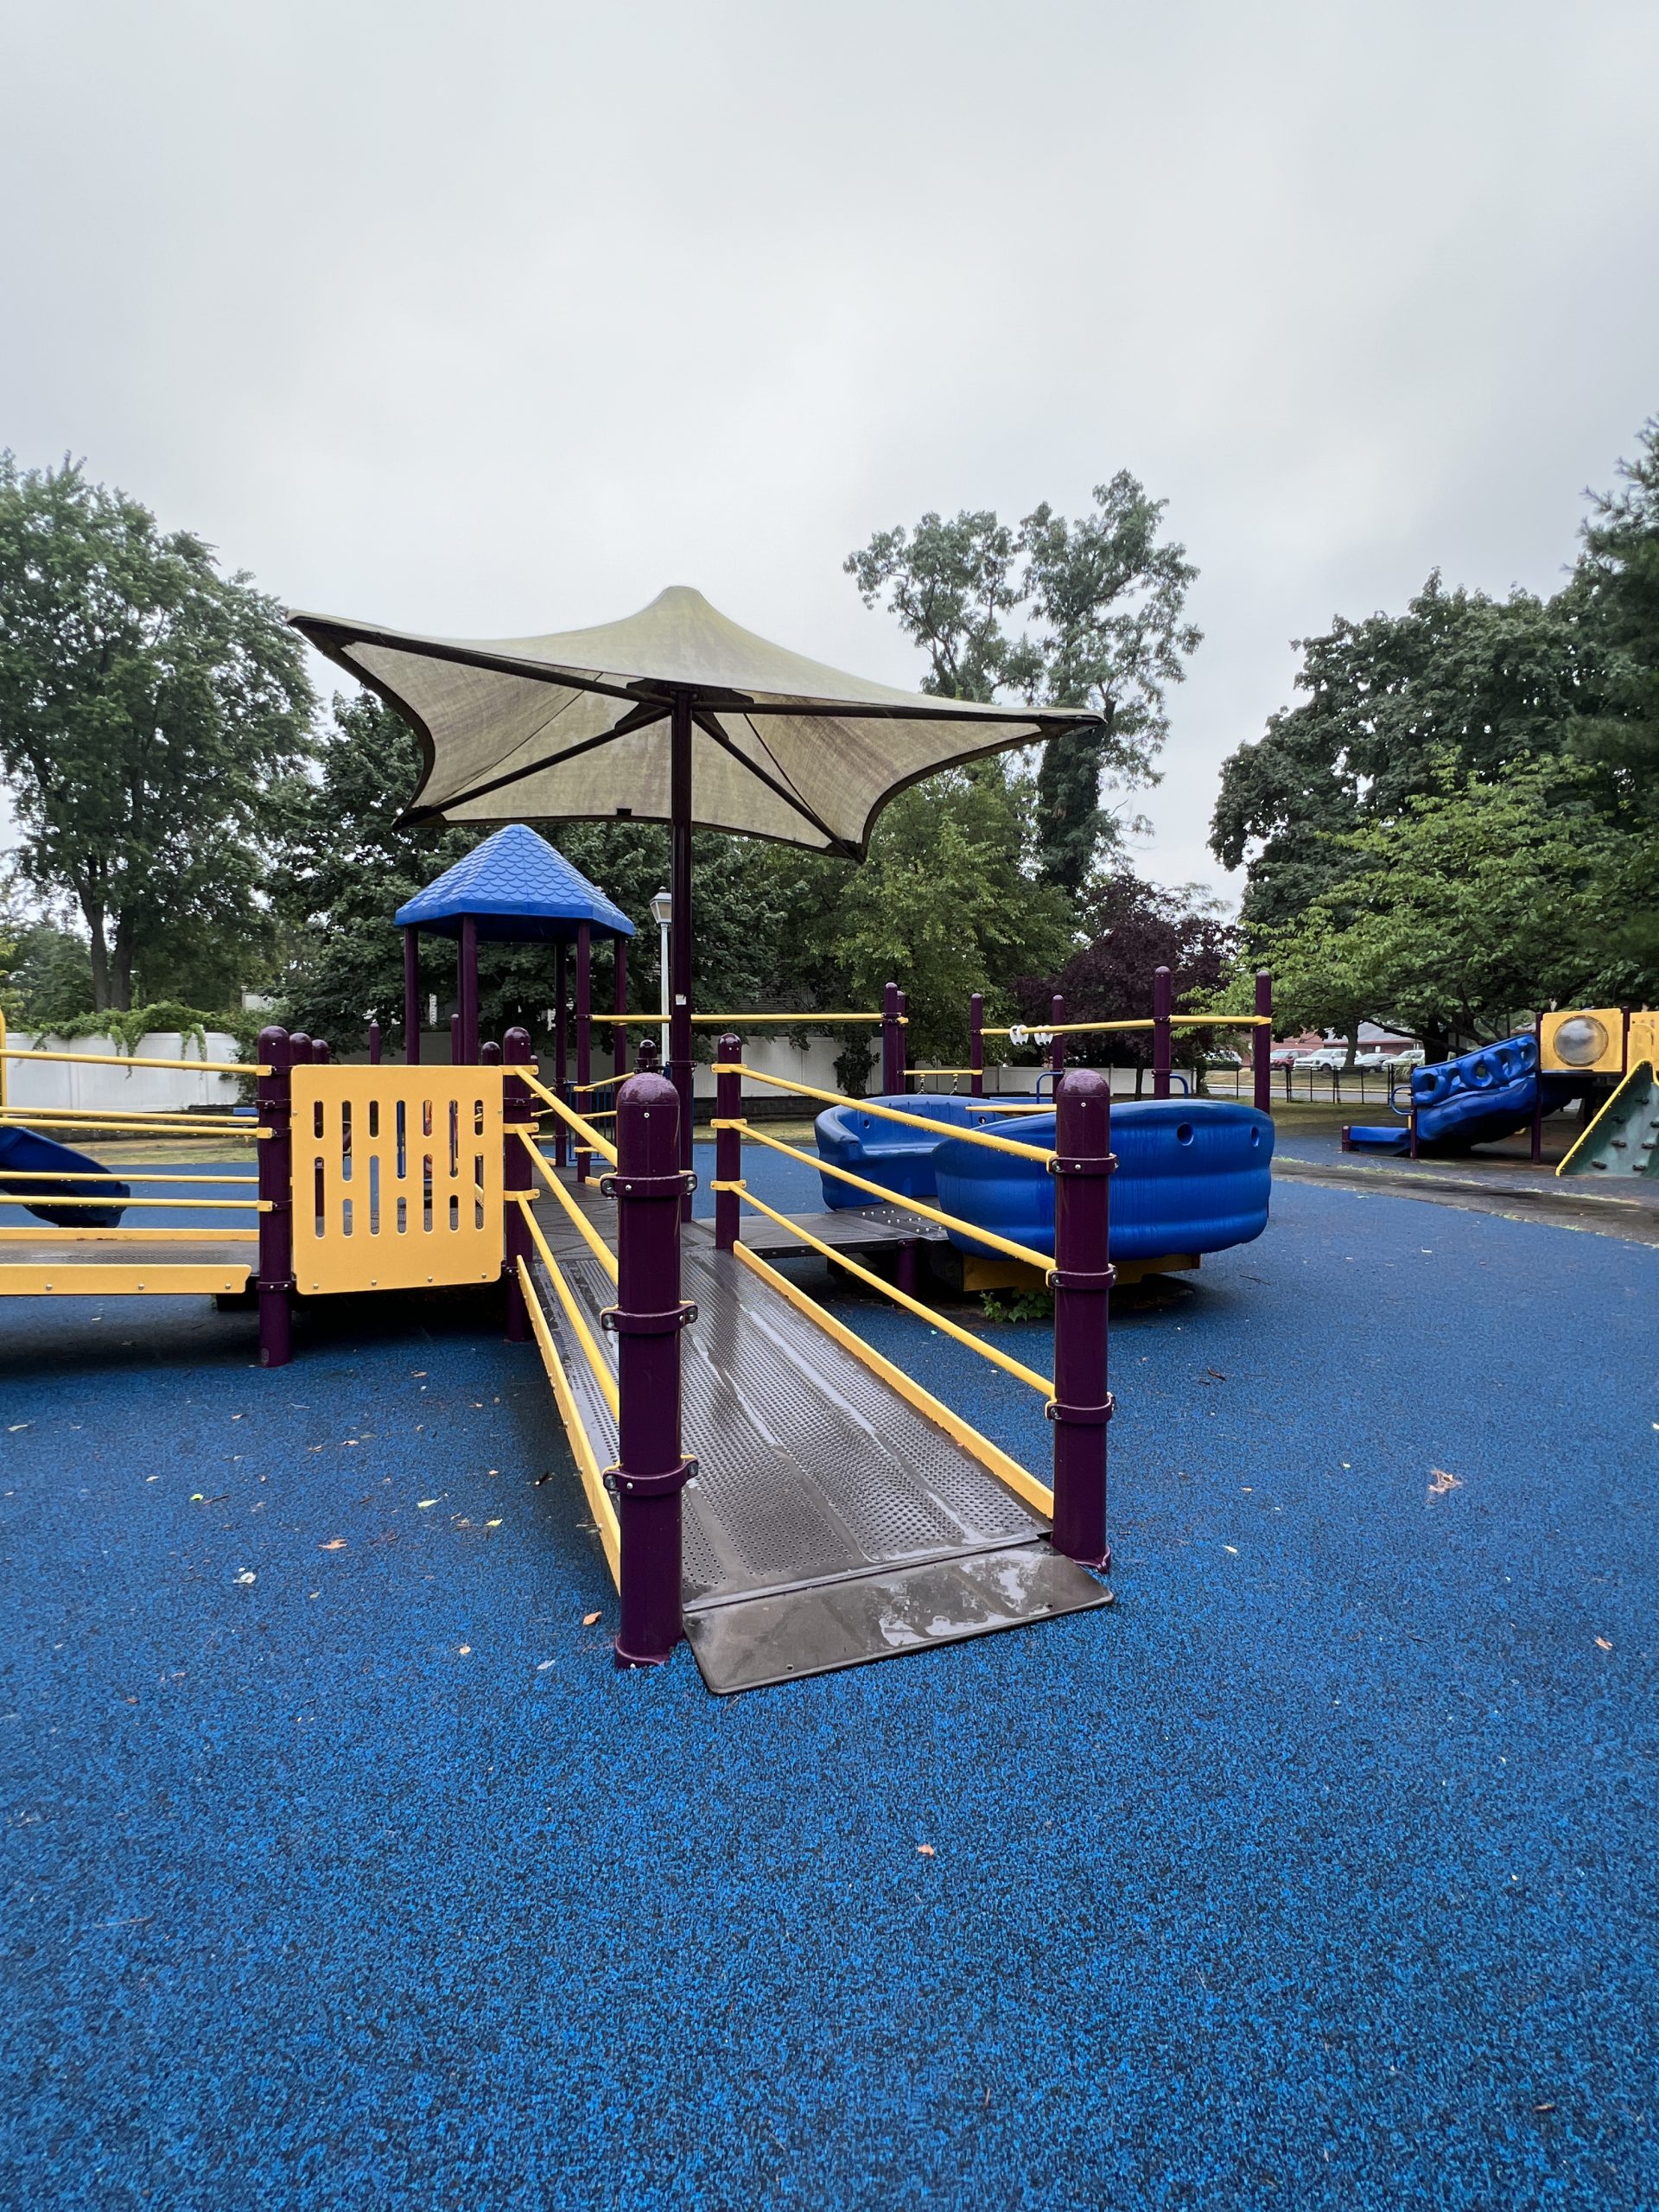 George M. Conway Park Playground in West Long Branch NJ - Larger Playground feature - Wheelchair ACCESSIBLE ramp one end TALL